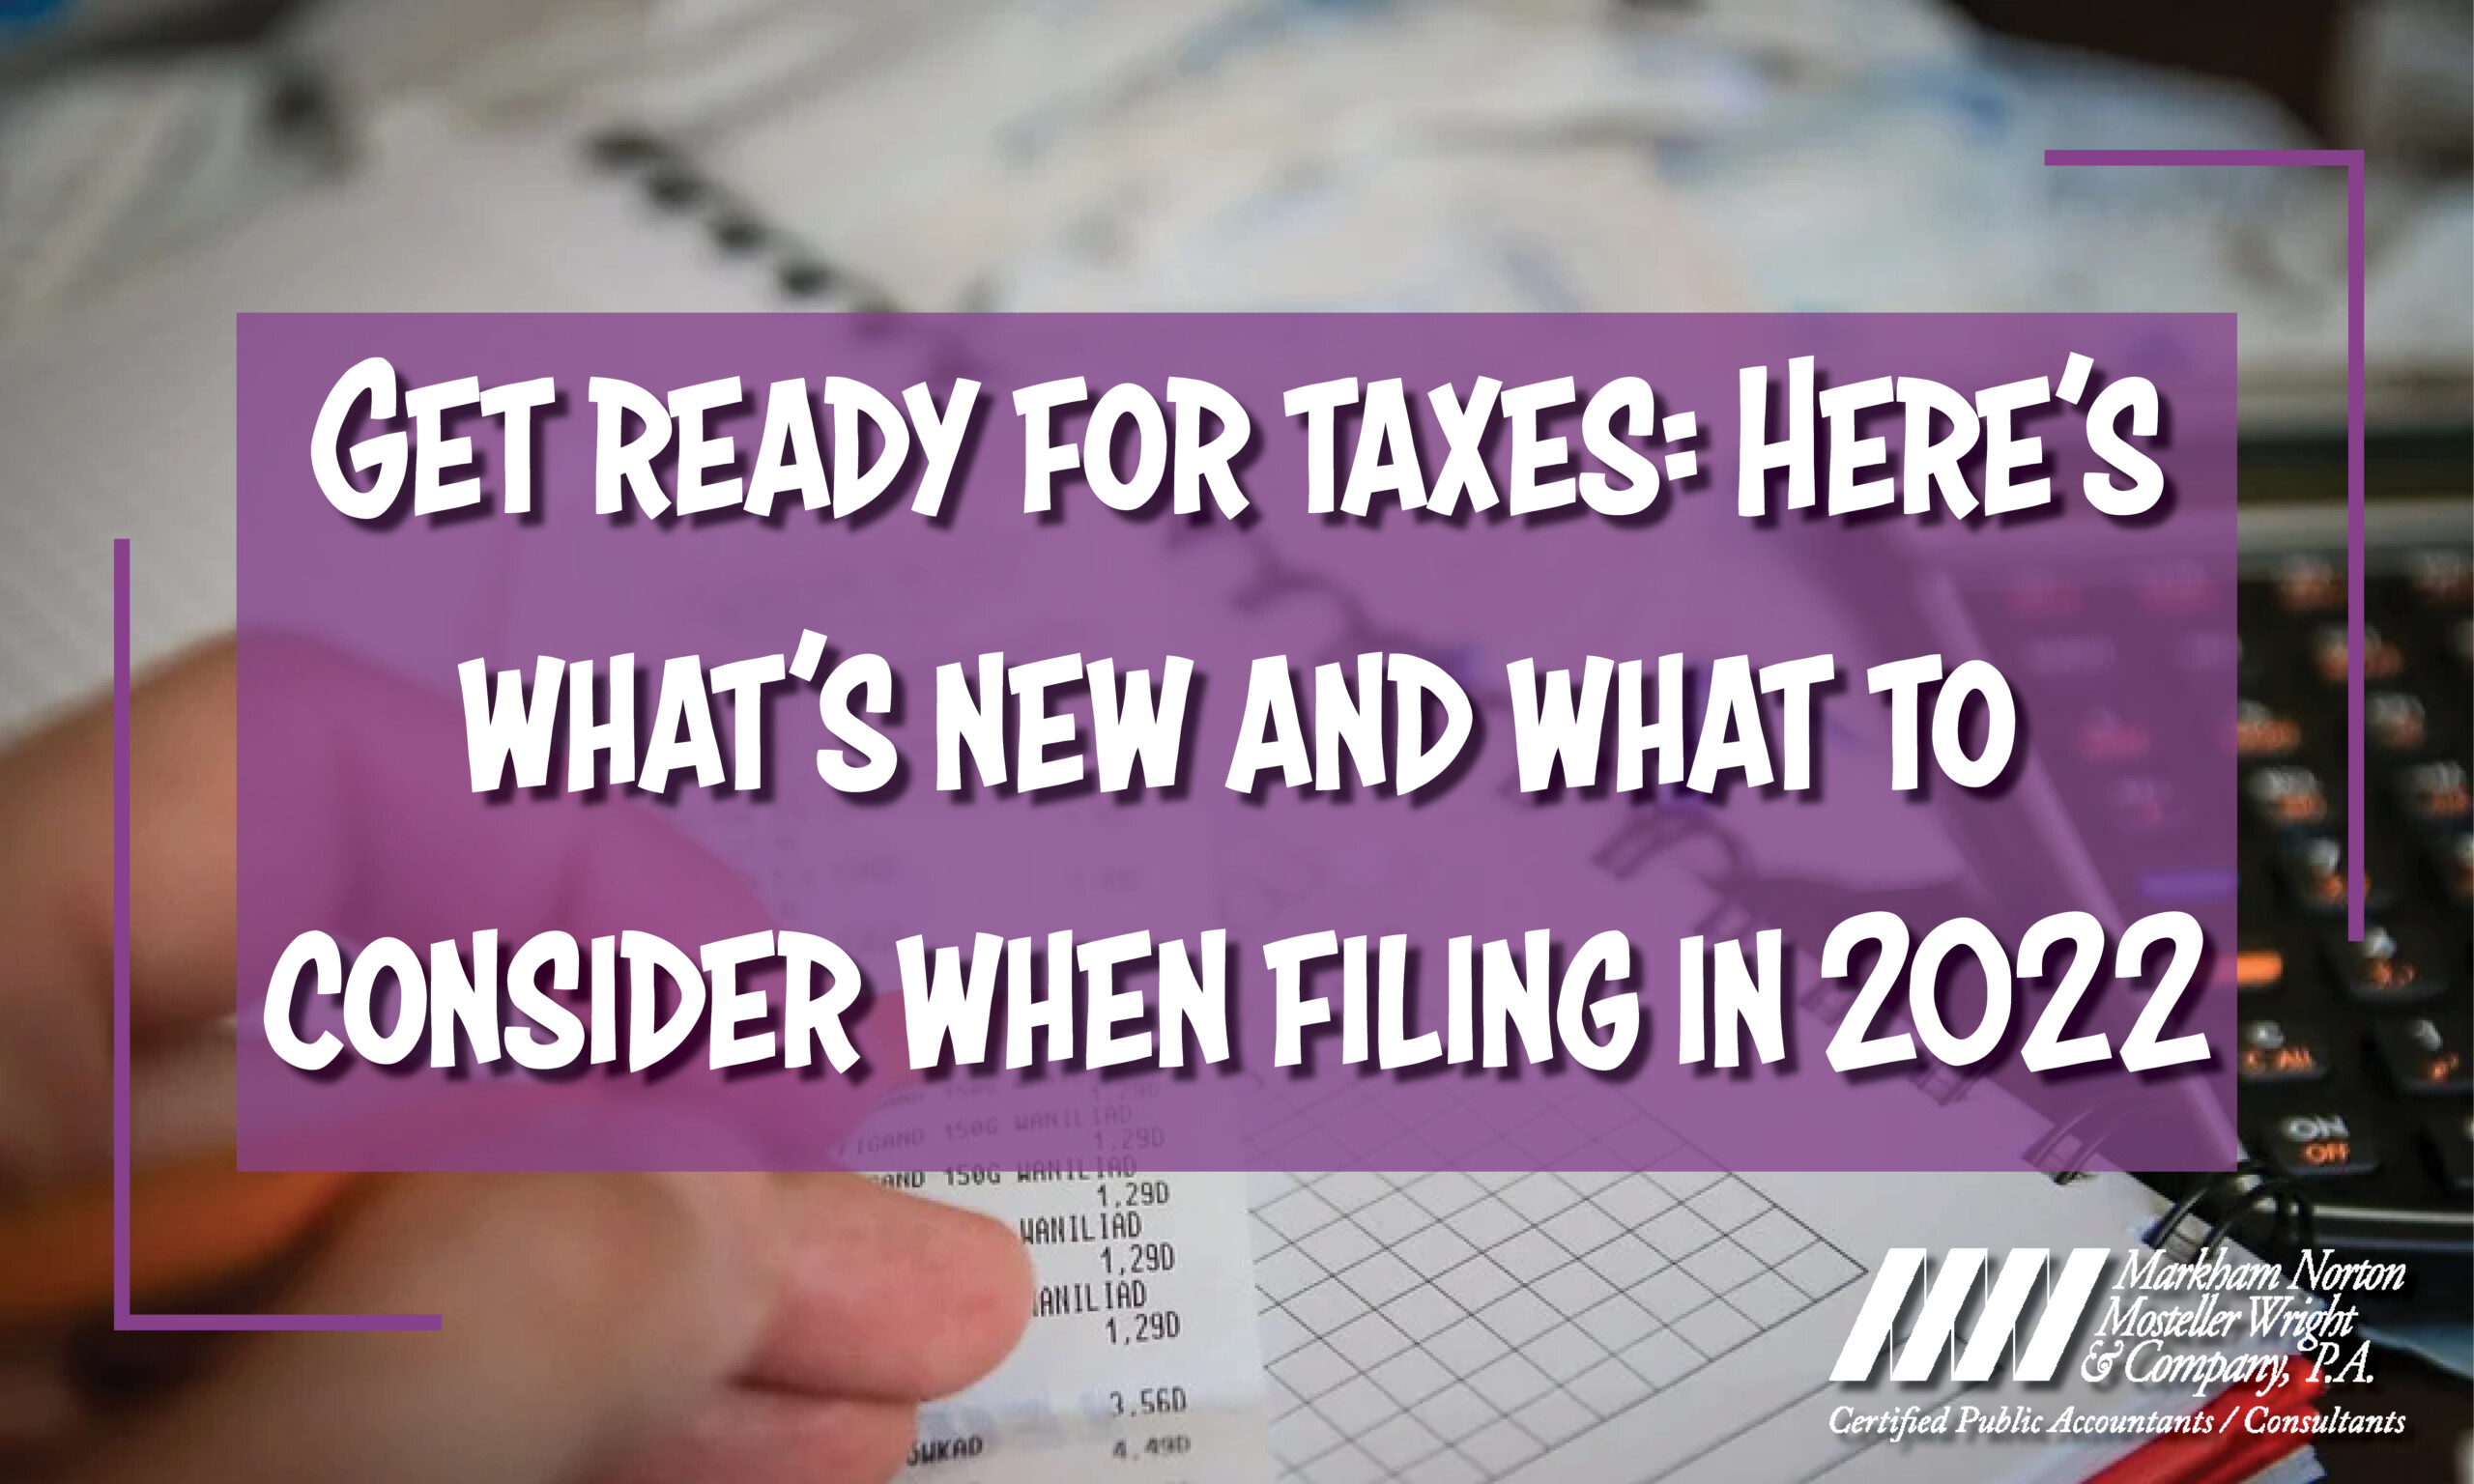 Get Ready For Taxes in 2022